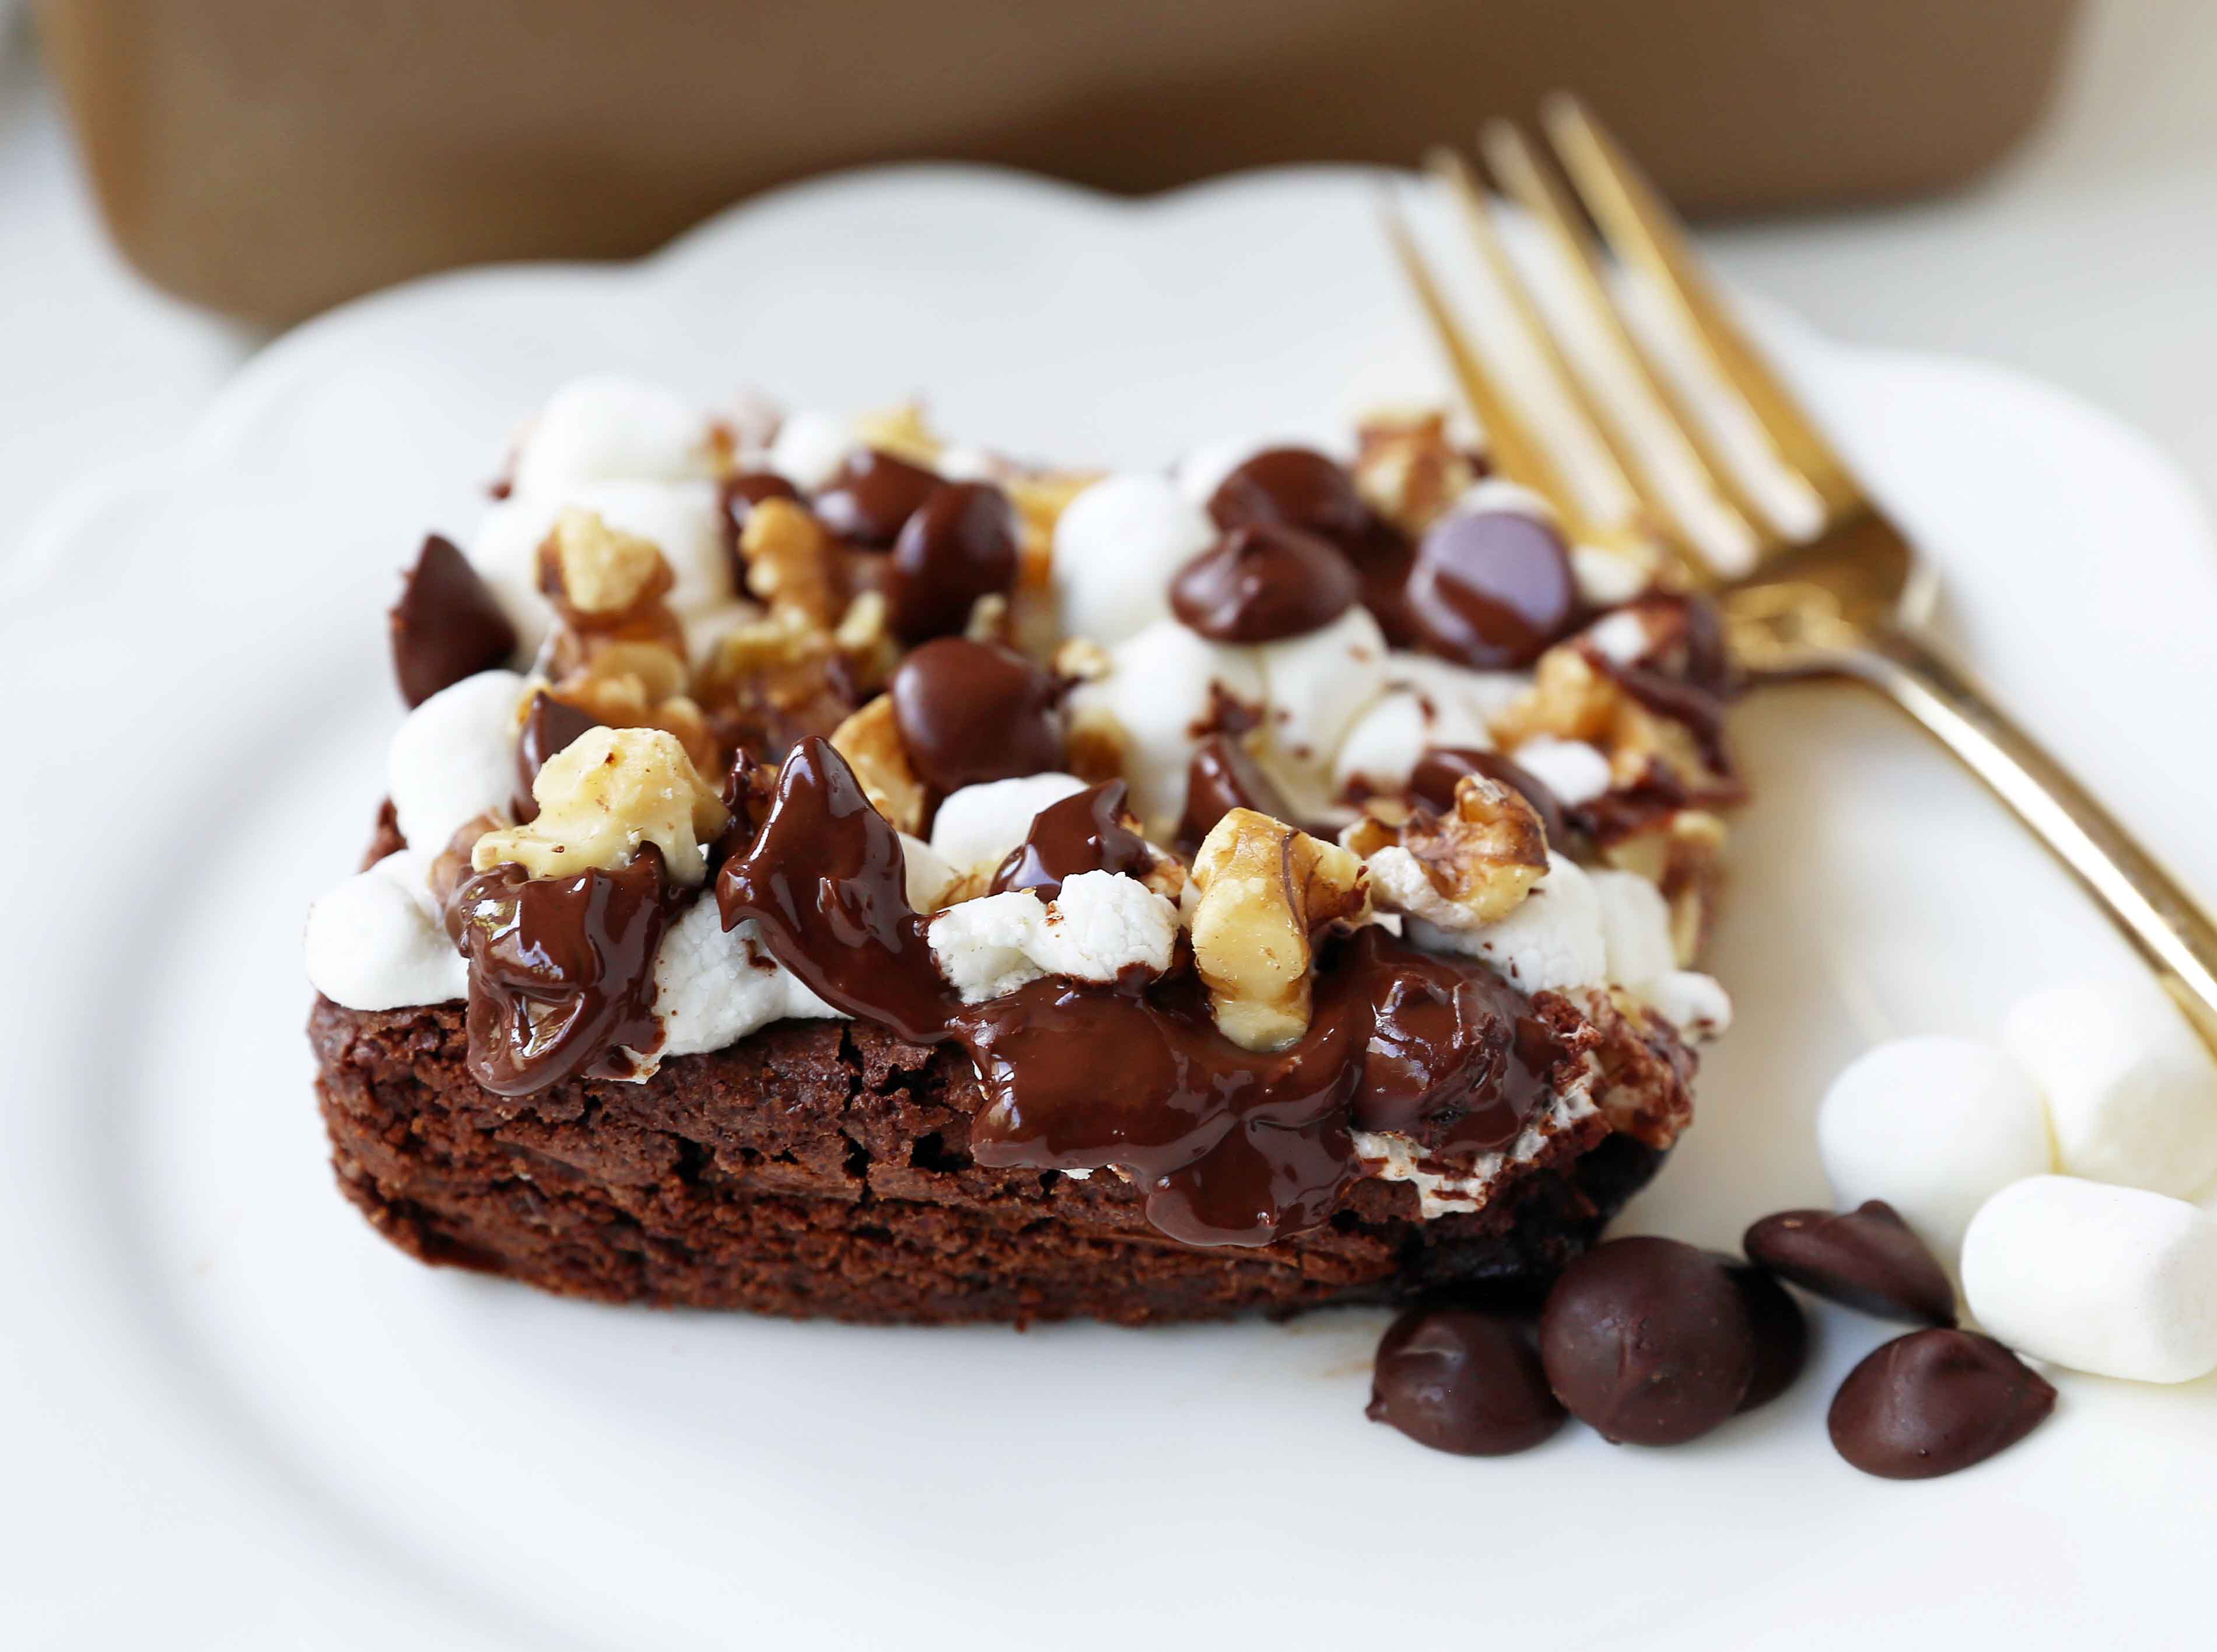 Rocky Road Brownies. Homemade decadent chocolate brownies topped with melted marshmallows, chocolate chips, and walnuts. A classic brownie! www.modernhoney.com #rockyroad #rockyroadbrownies #gourmetbrownies